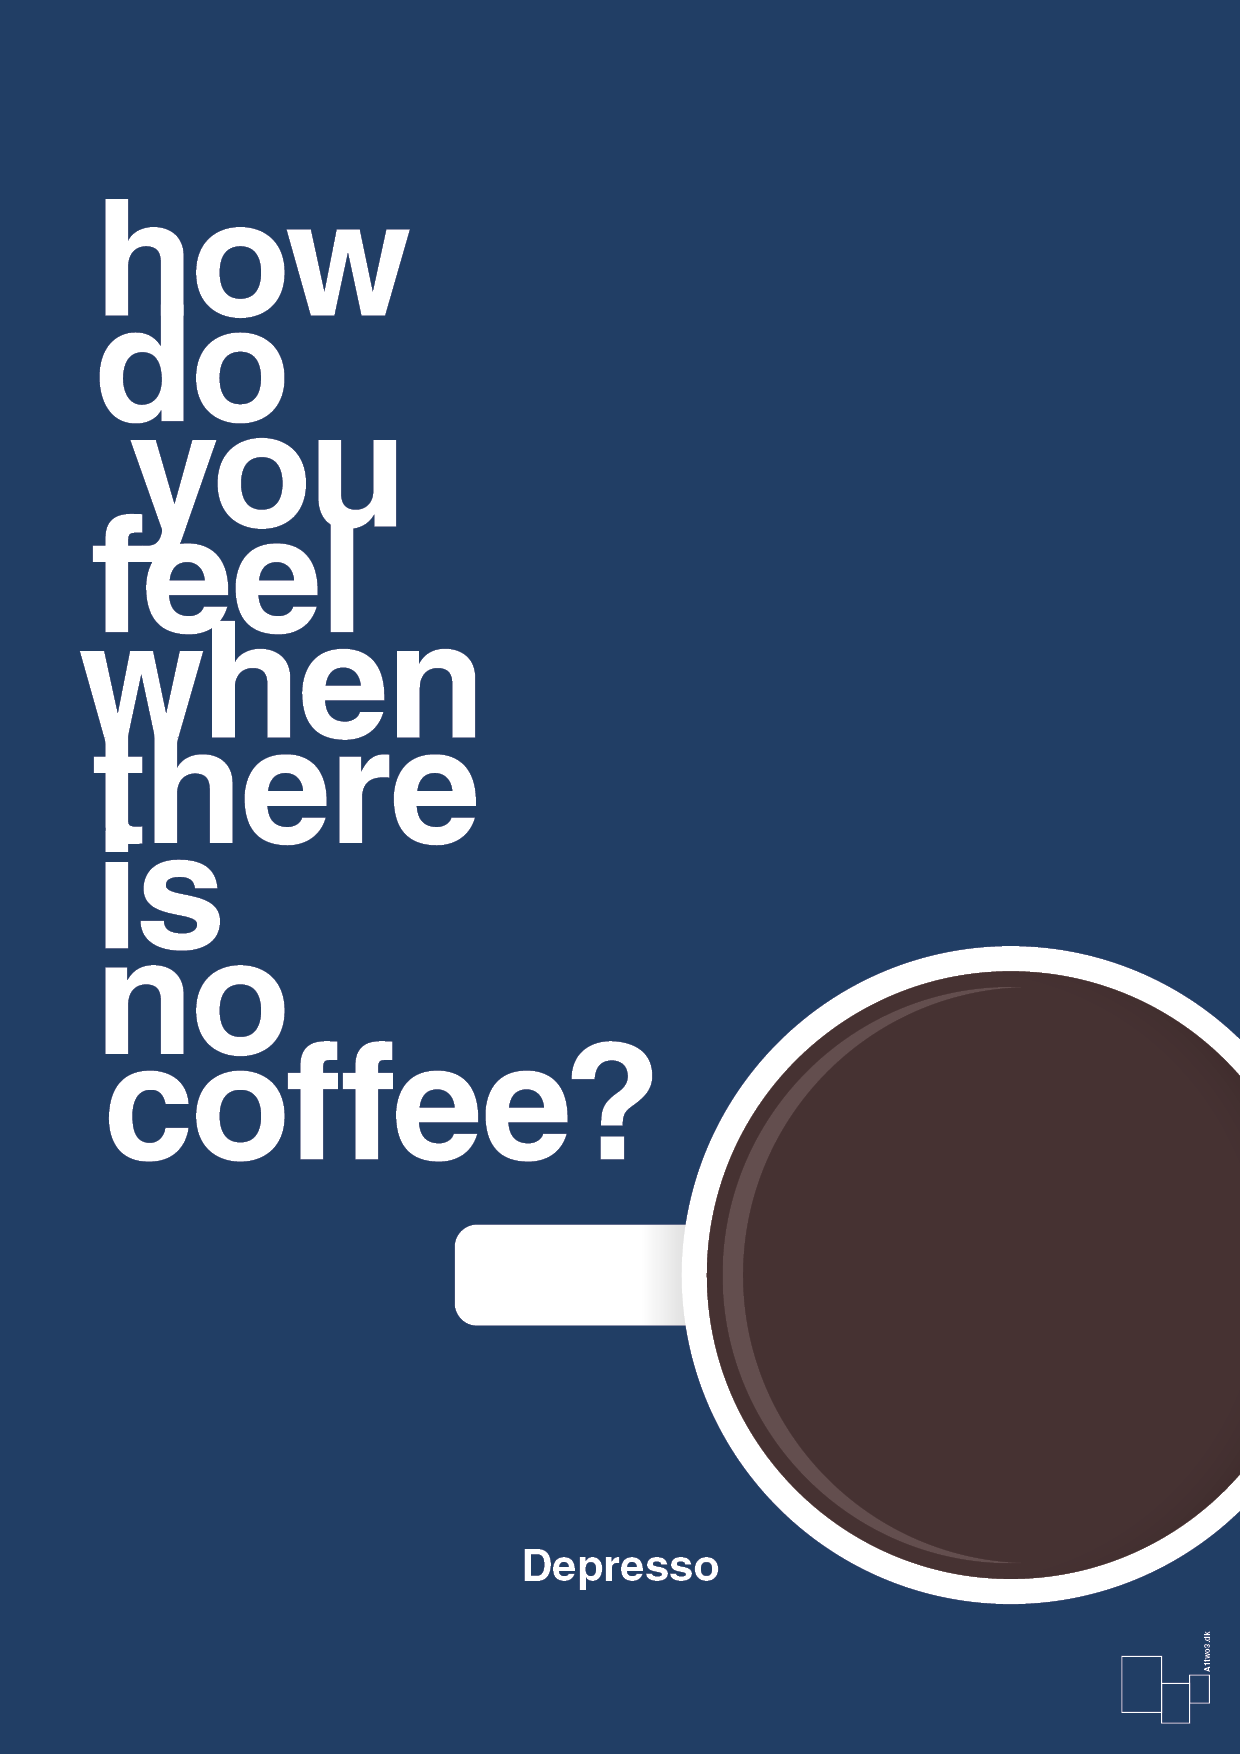 how do you feel when there is no coffee? depresso - Plakat med Mad & Drikke i Lapis Blue